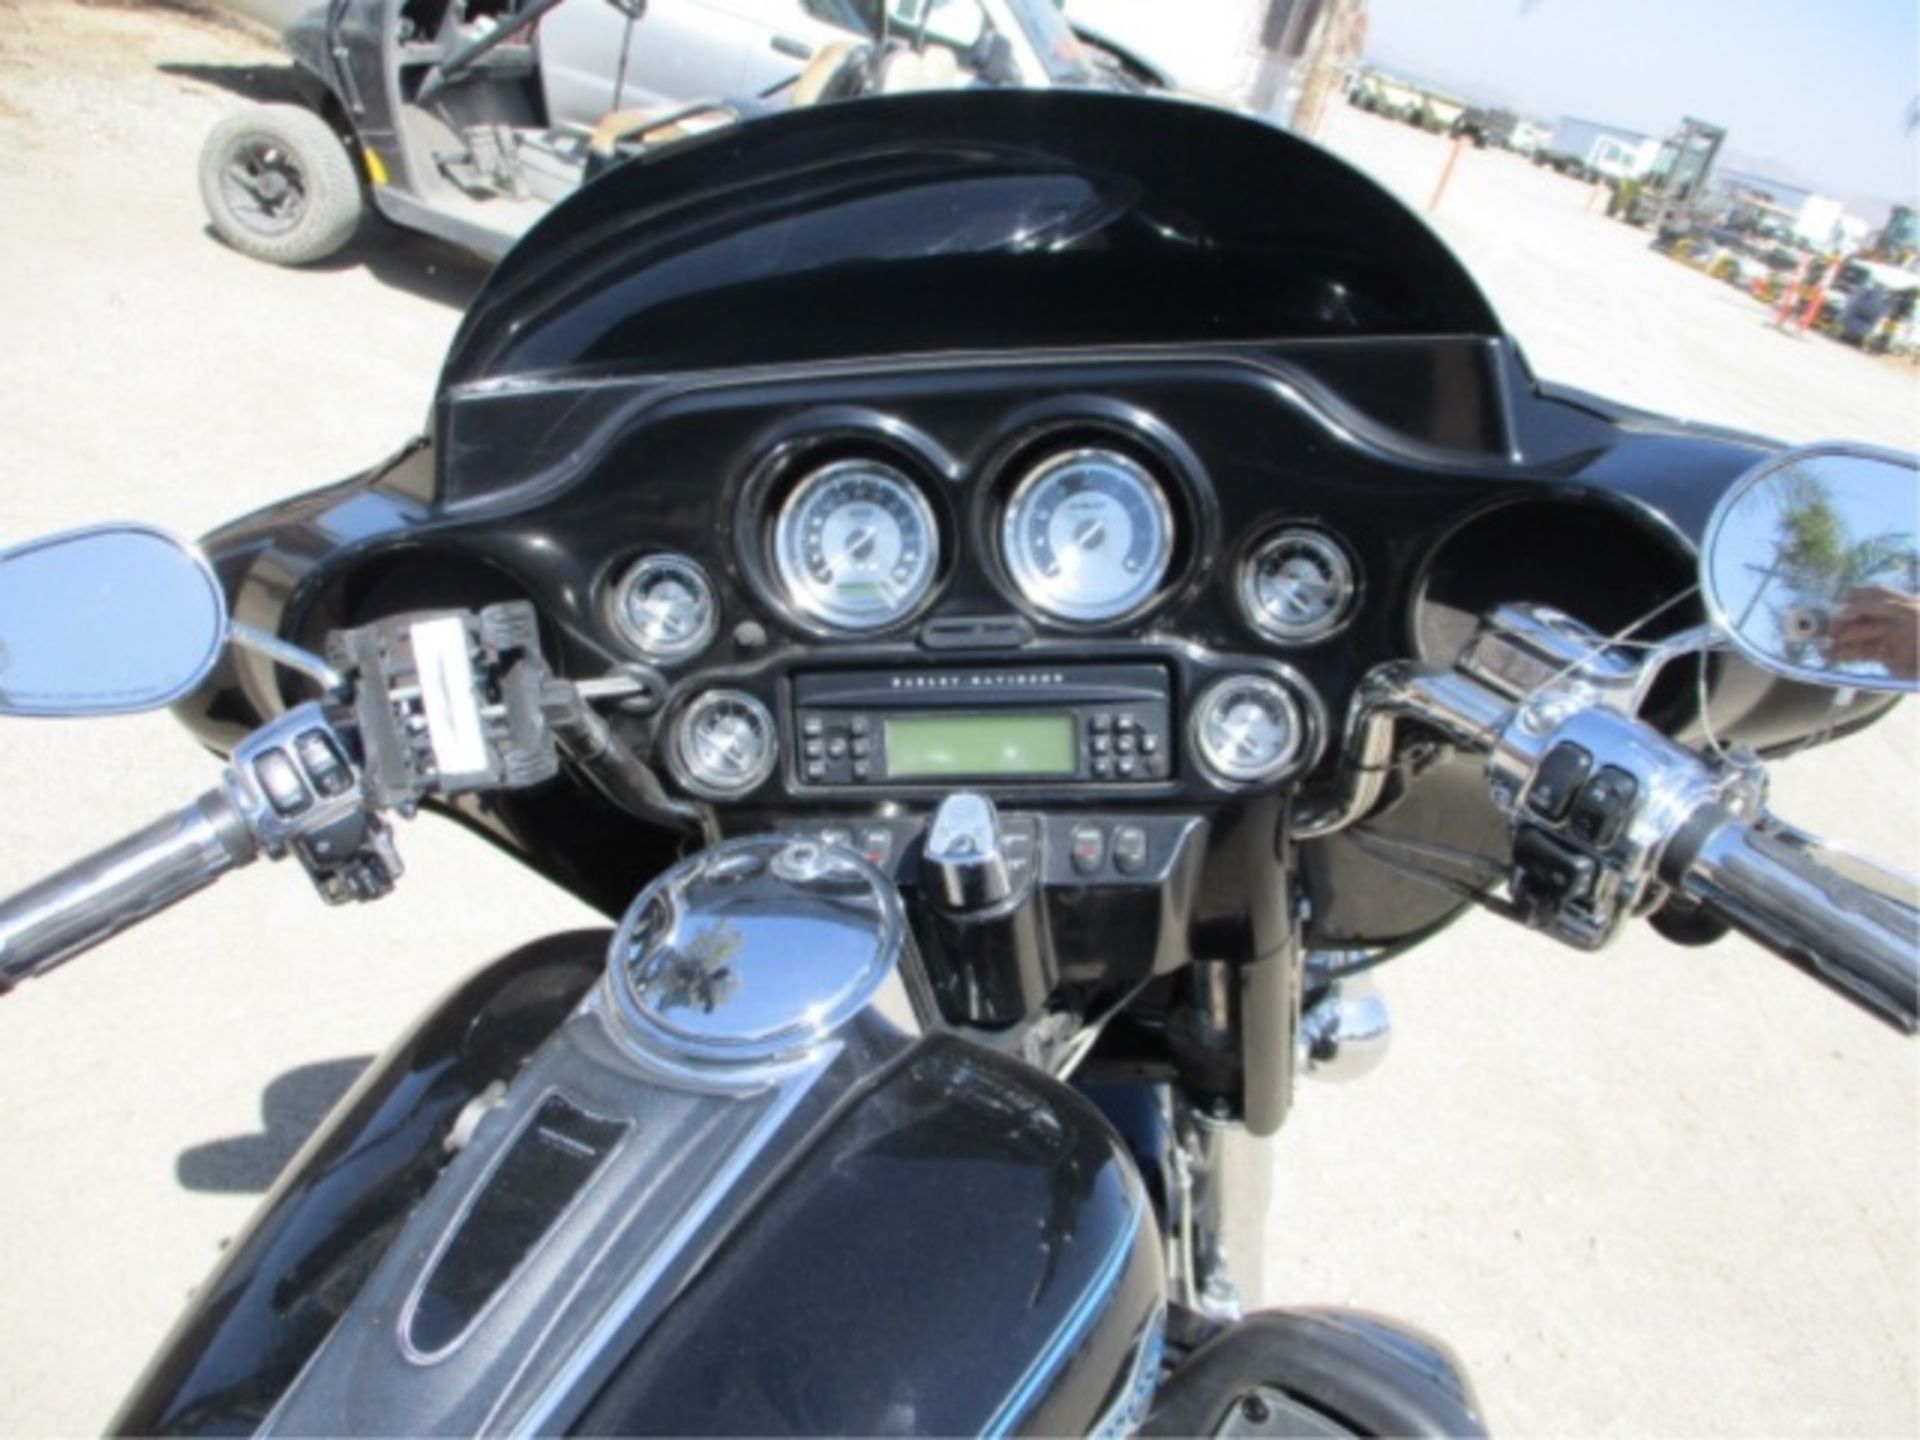 2006 Harley Davidson Electra Glide Motor Cycle, Ultra Classic, 1450cc Gas, External Speakers, - Image 18 of 44